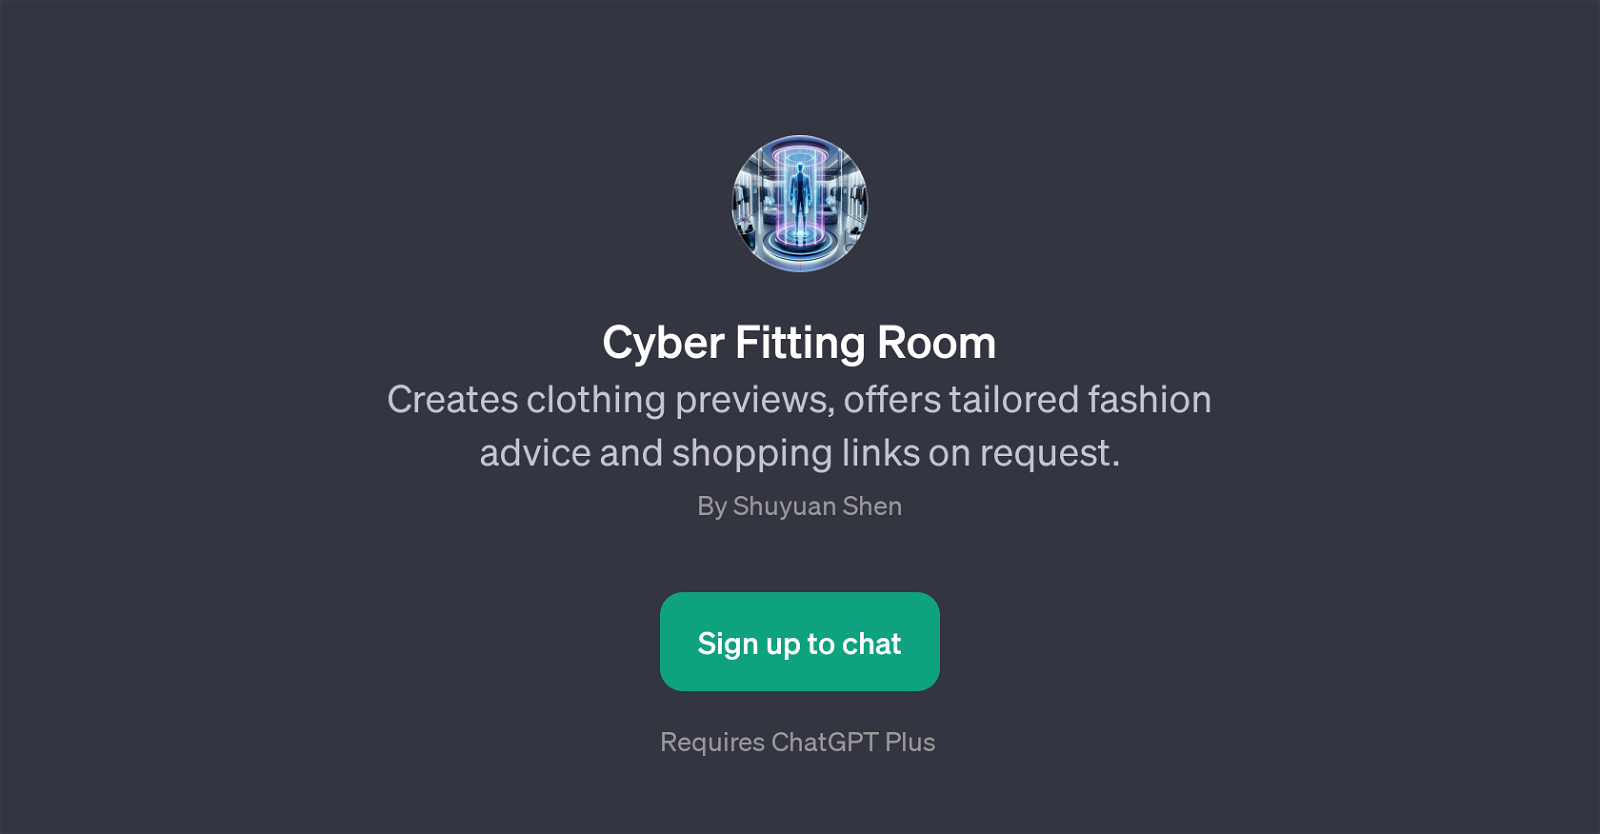 Cyber Fitting Room website